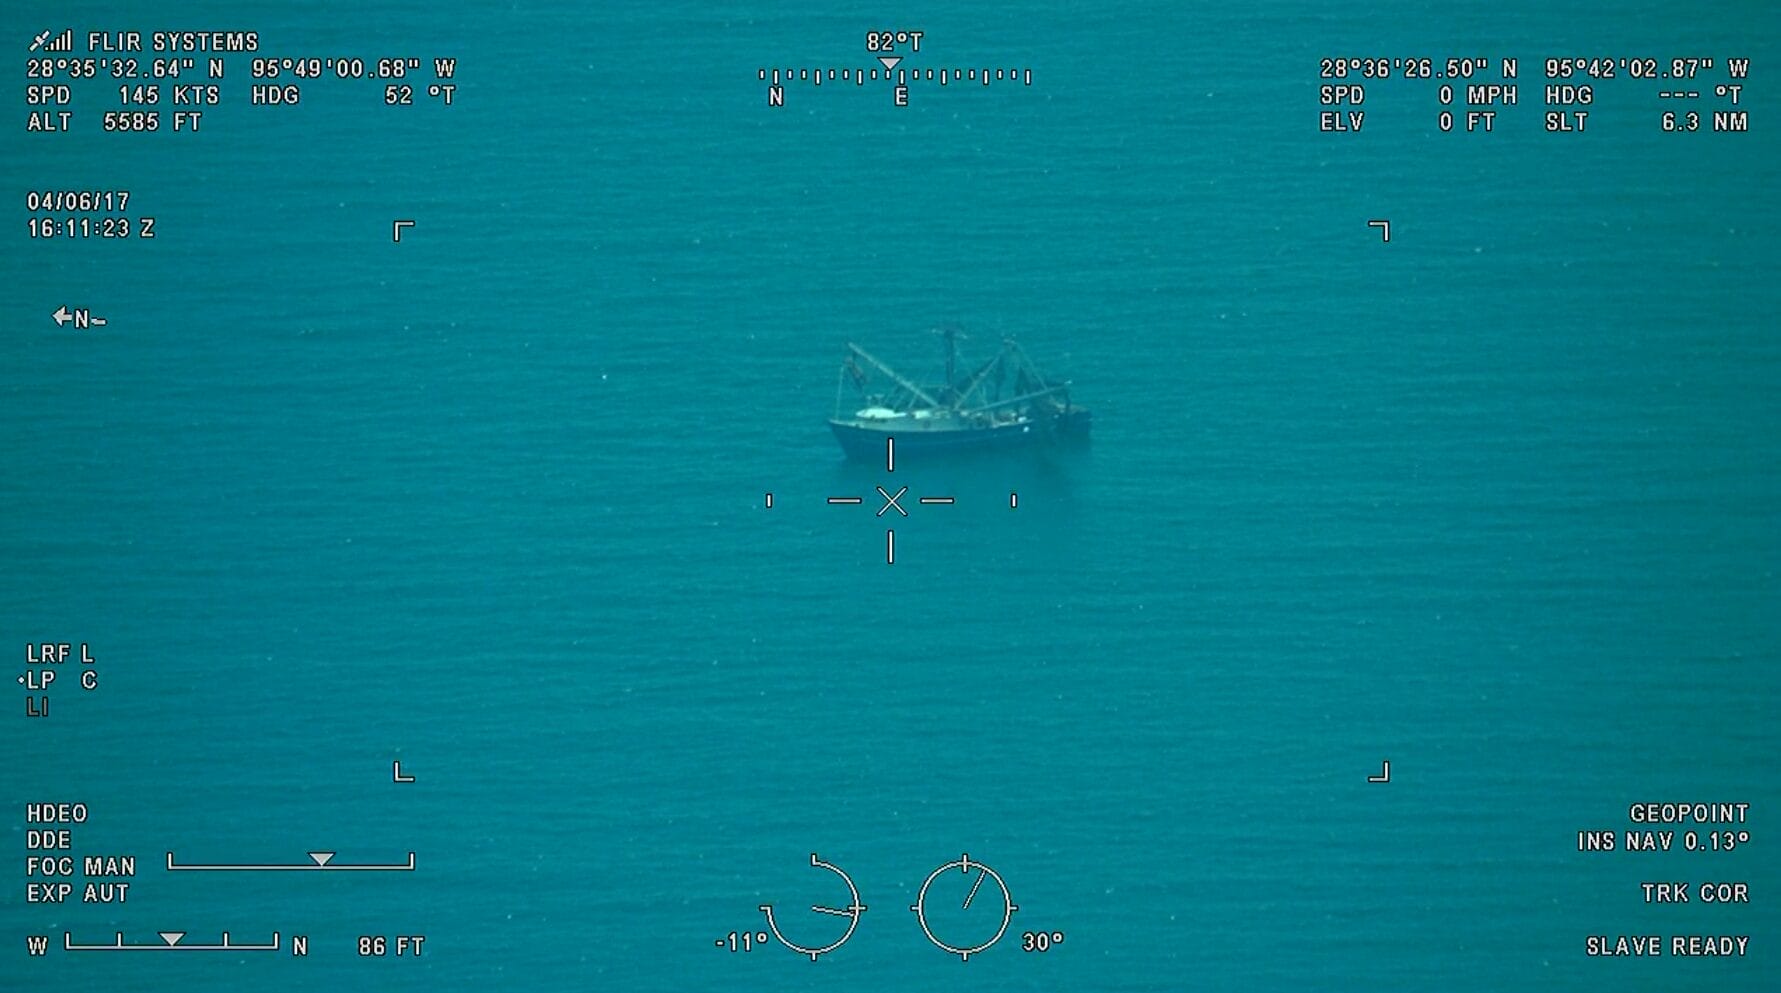 Image of a boat through the FLIR Systems